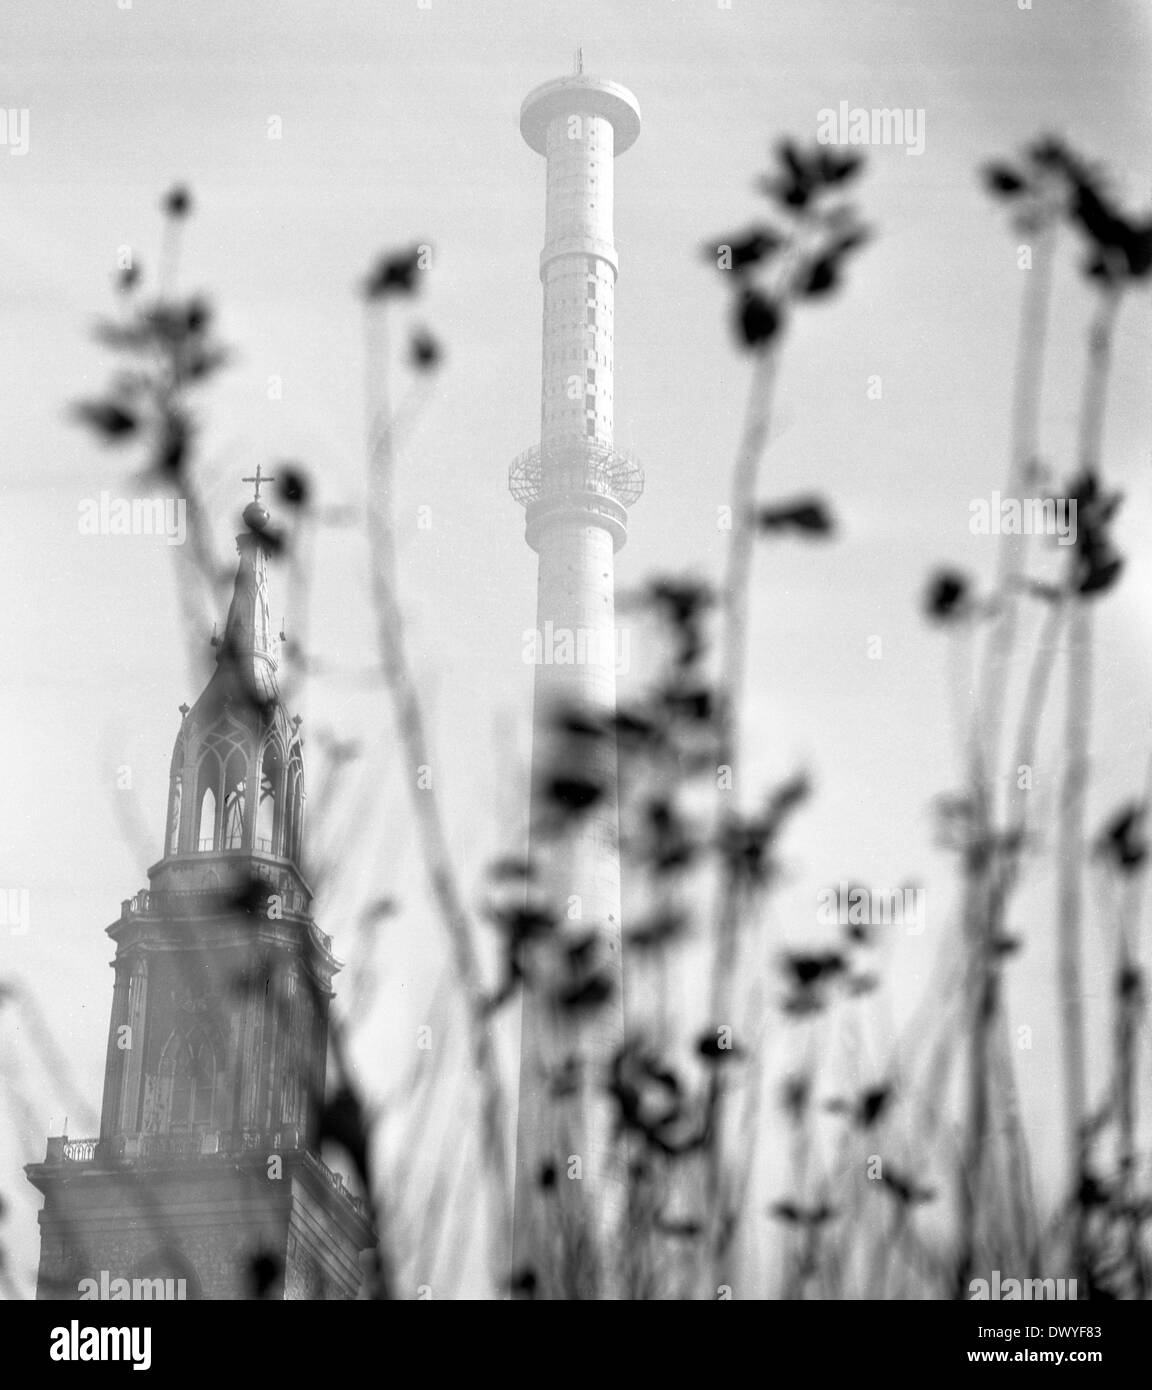 Berlin, GDR, Tower of St Mary's in front of the tower shaft of the television tower on Alexanderplatz Stock Photo